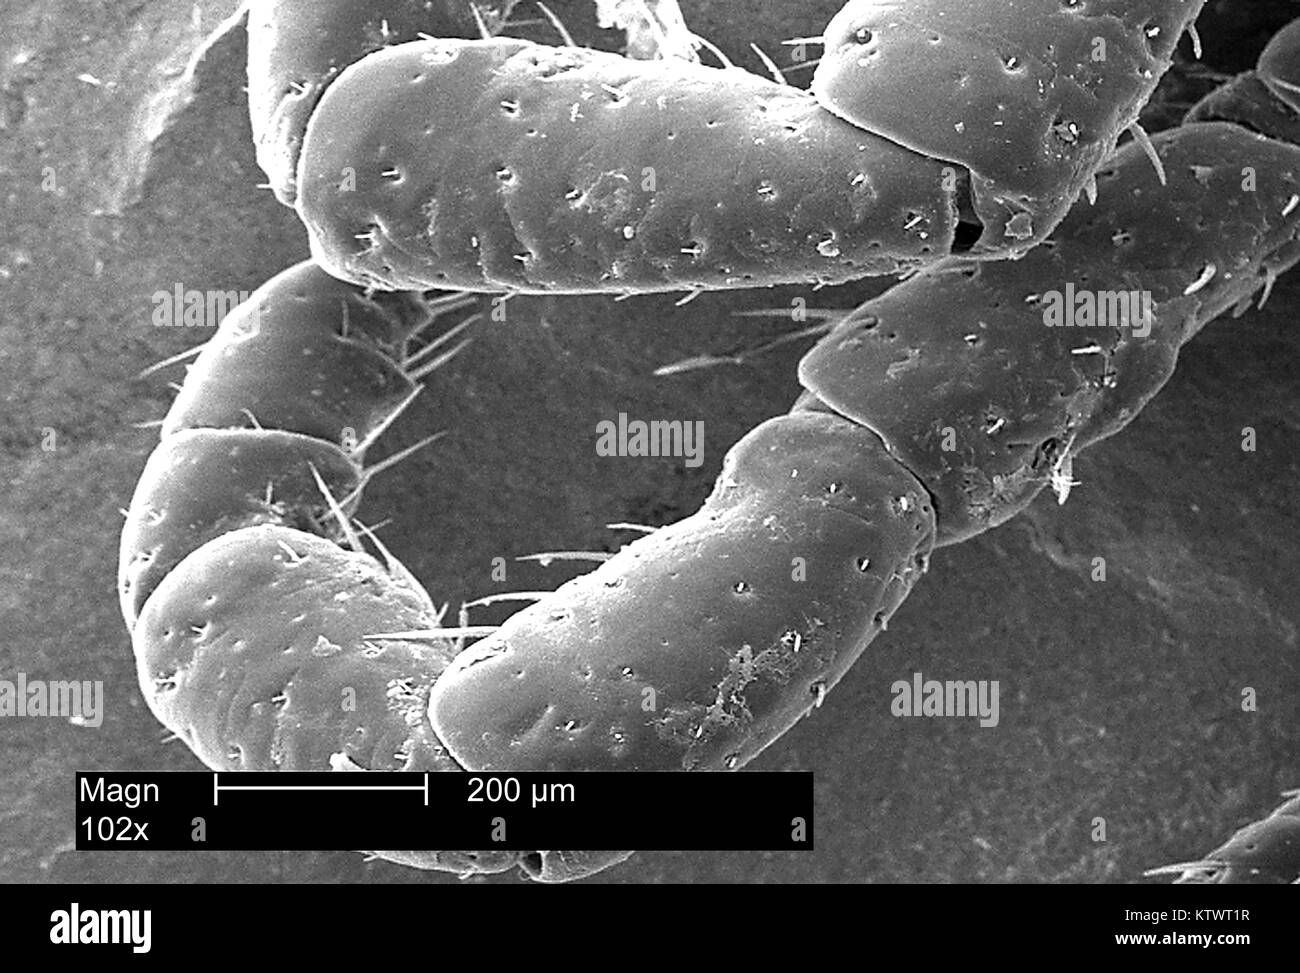 This scanning electron micrograph (SEM) depicts a dorsal view of the leg appendages of an American dog tick, Dermacentor variabilis, magnified 102X. Ticks are of the class Arachnida, as are spiders and mites, 2002. D. variabilis is a known carrier of Rocky Mountain Spotted Fever caused by the bacterium Rickettsia rickettsii . Image courtesy CDC. Stock Photo